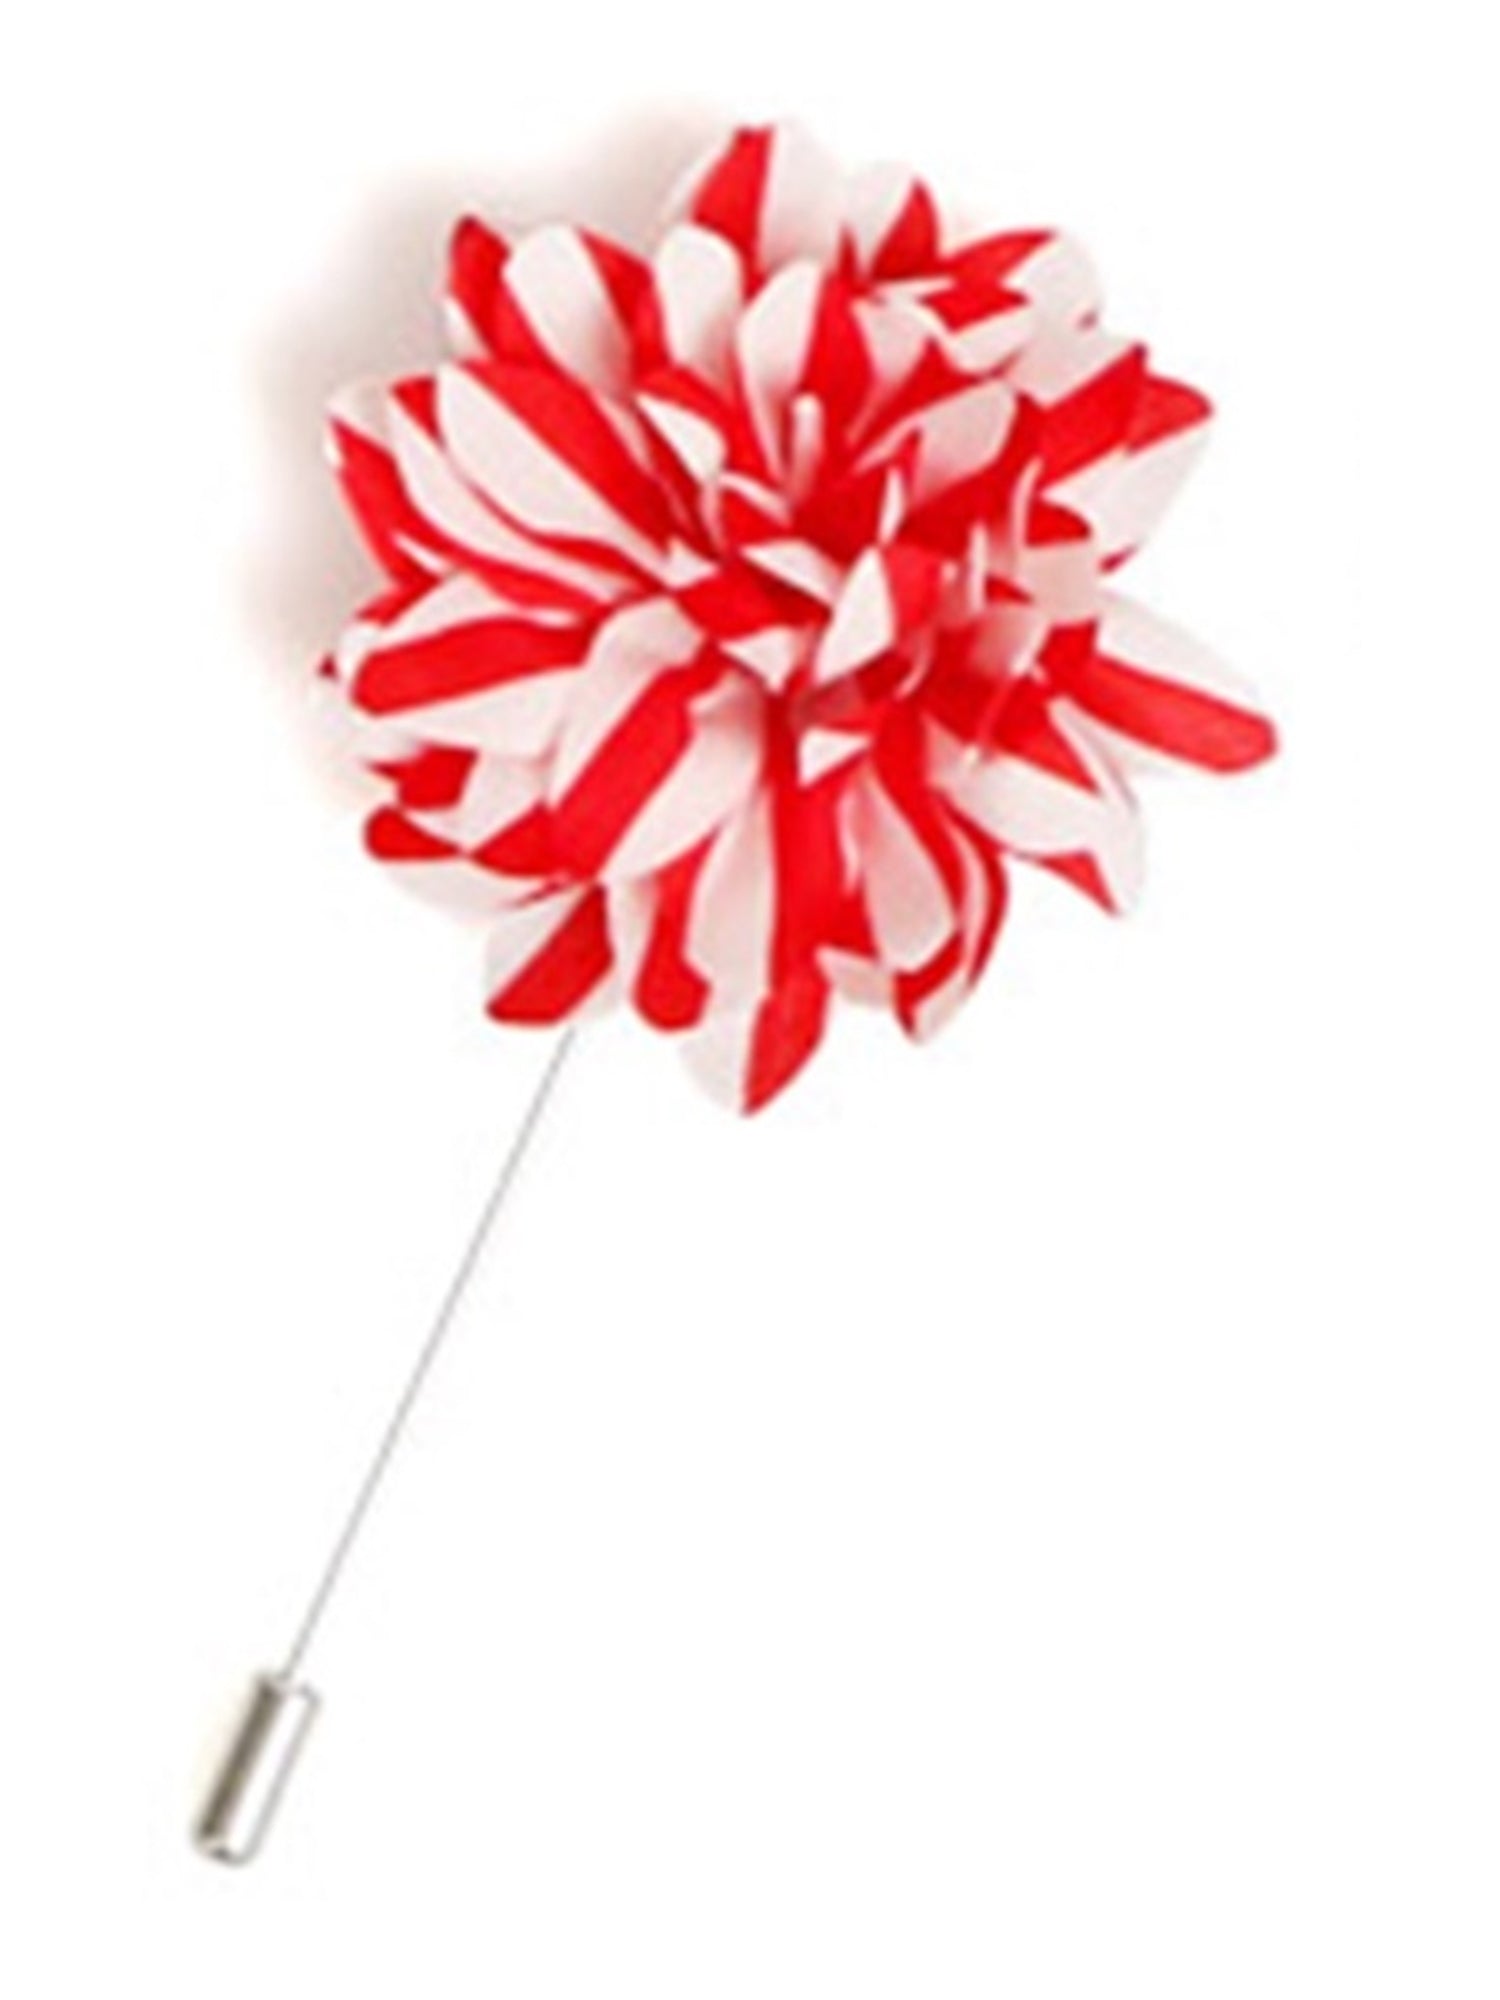 Men's Flower Lapel Pin Boutonniere For Suit Lapel Pin TheDapperTie Red & White Stripe Regular 